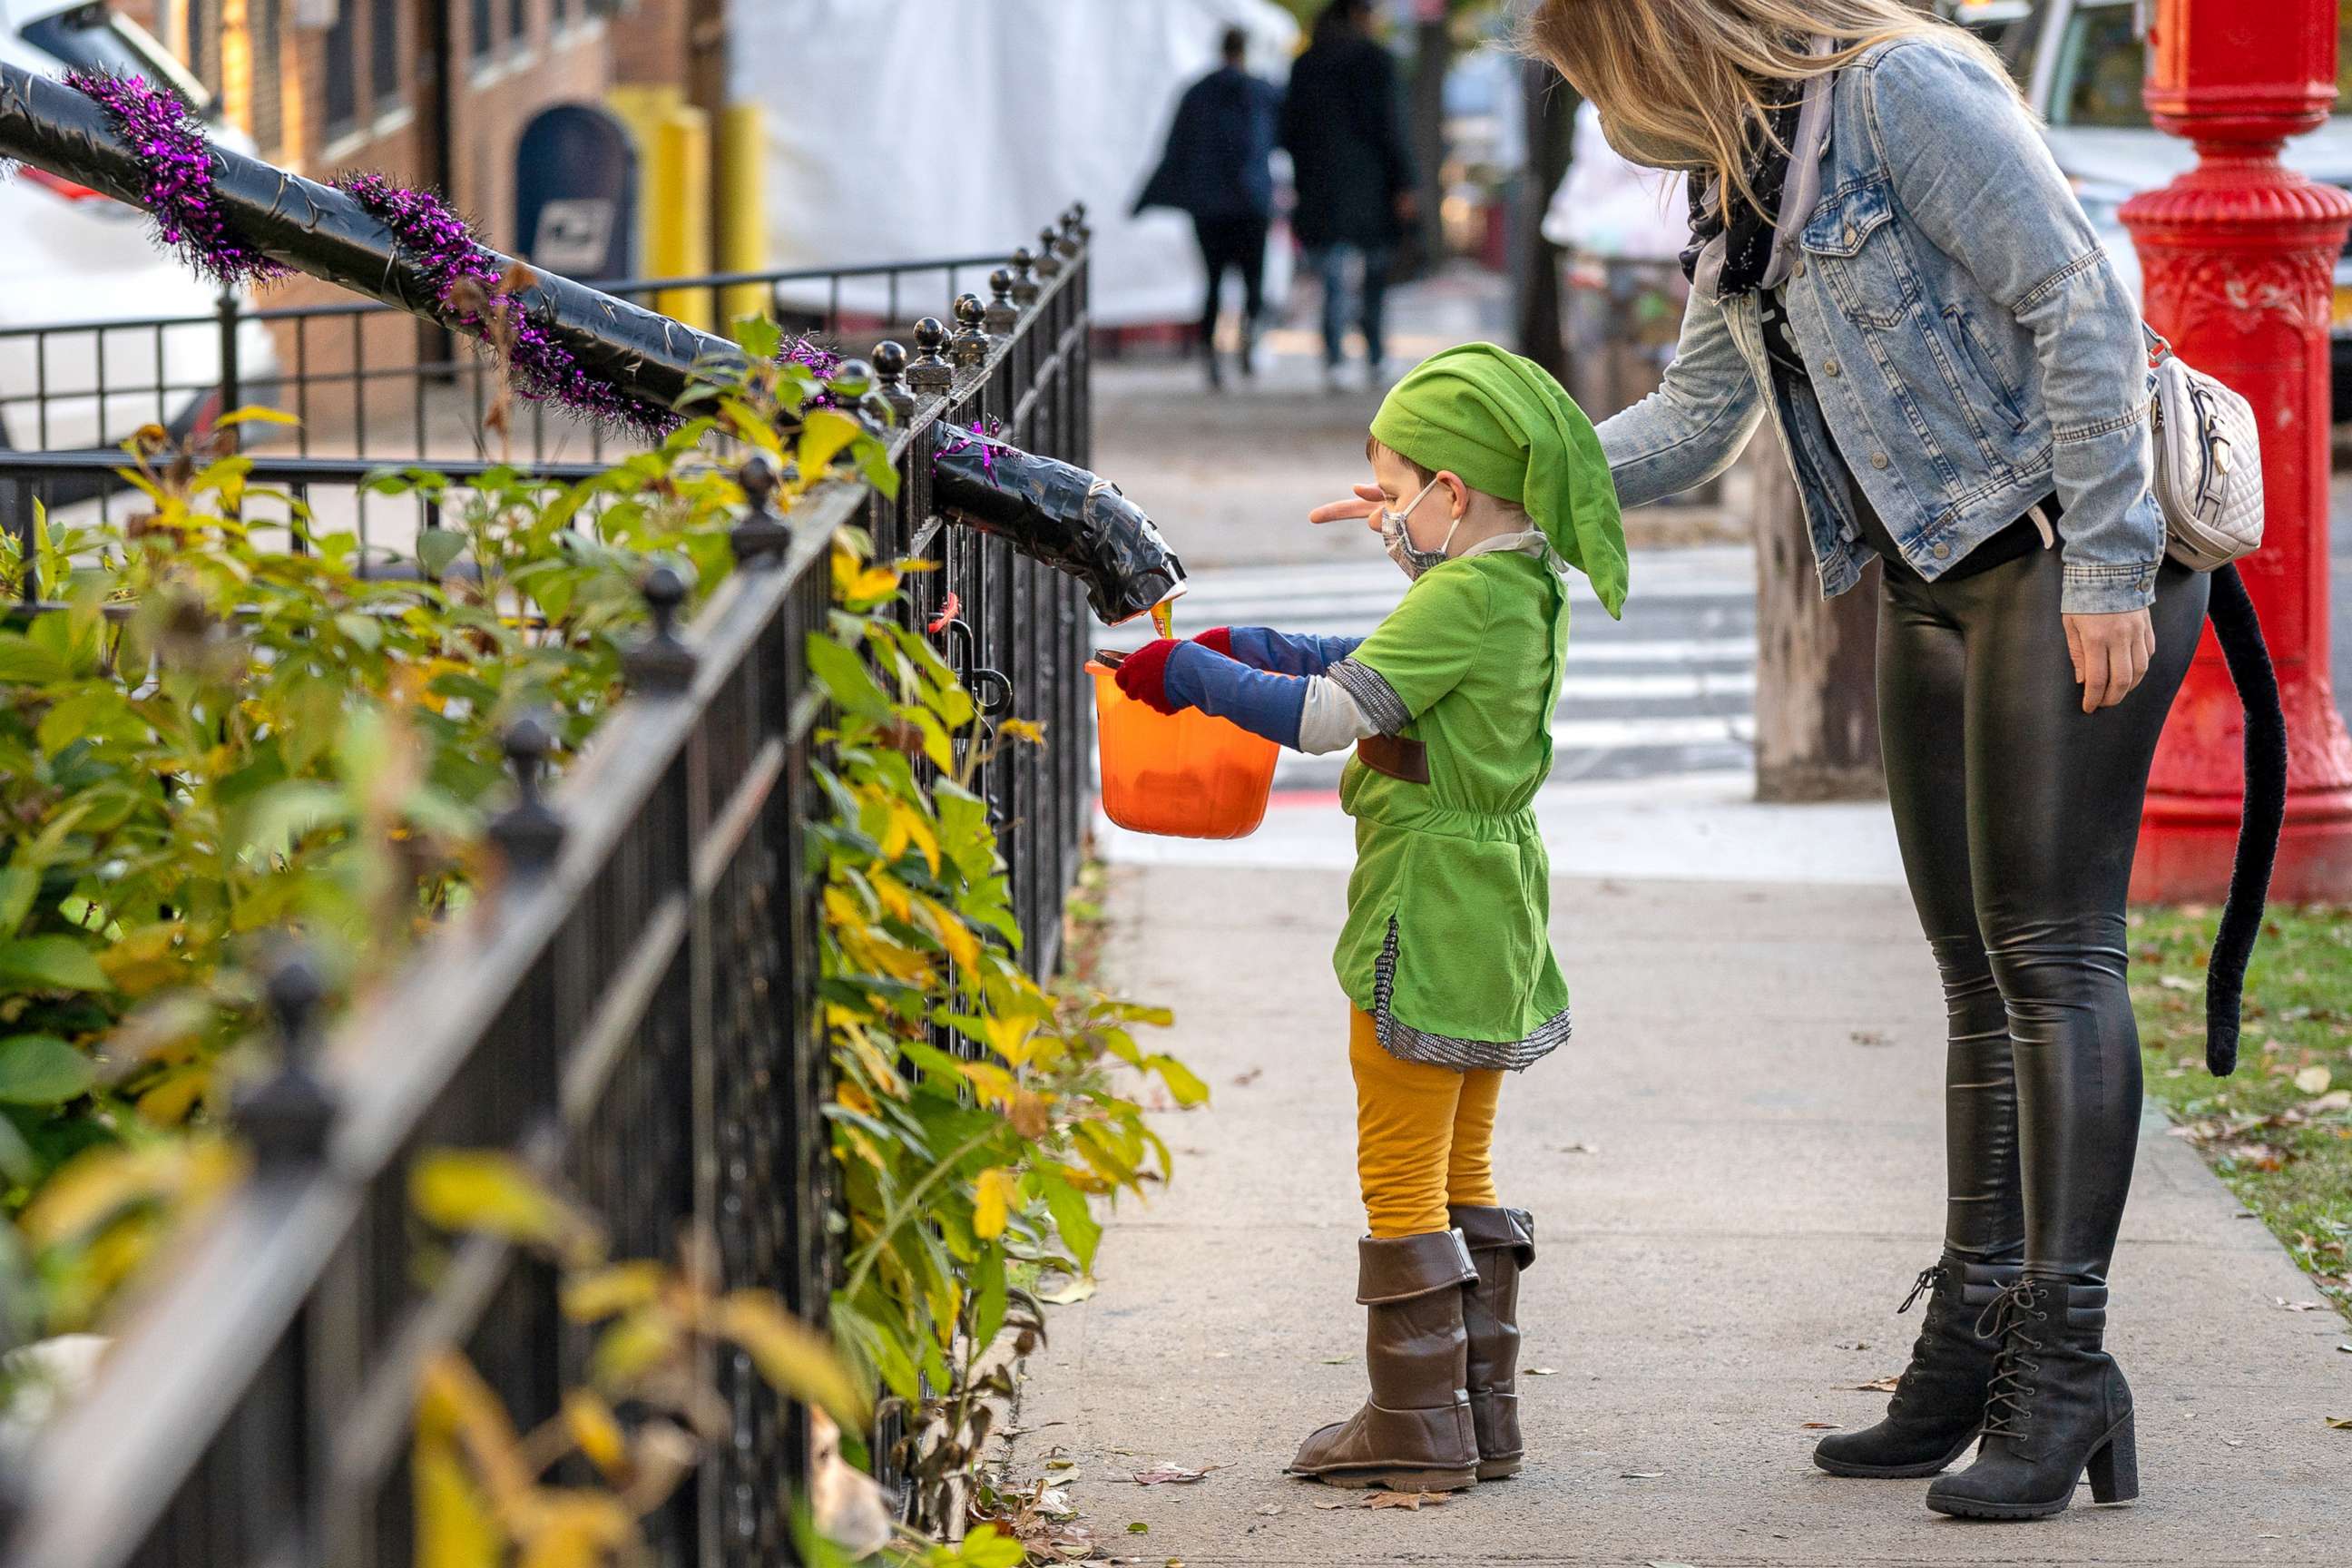 PHOTO: Children receive treats by candy chutes while trick-or-treating for Halloween in Woodlawn Heights on Oct. 31, 2020 in New York City.